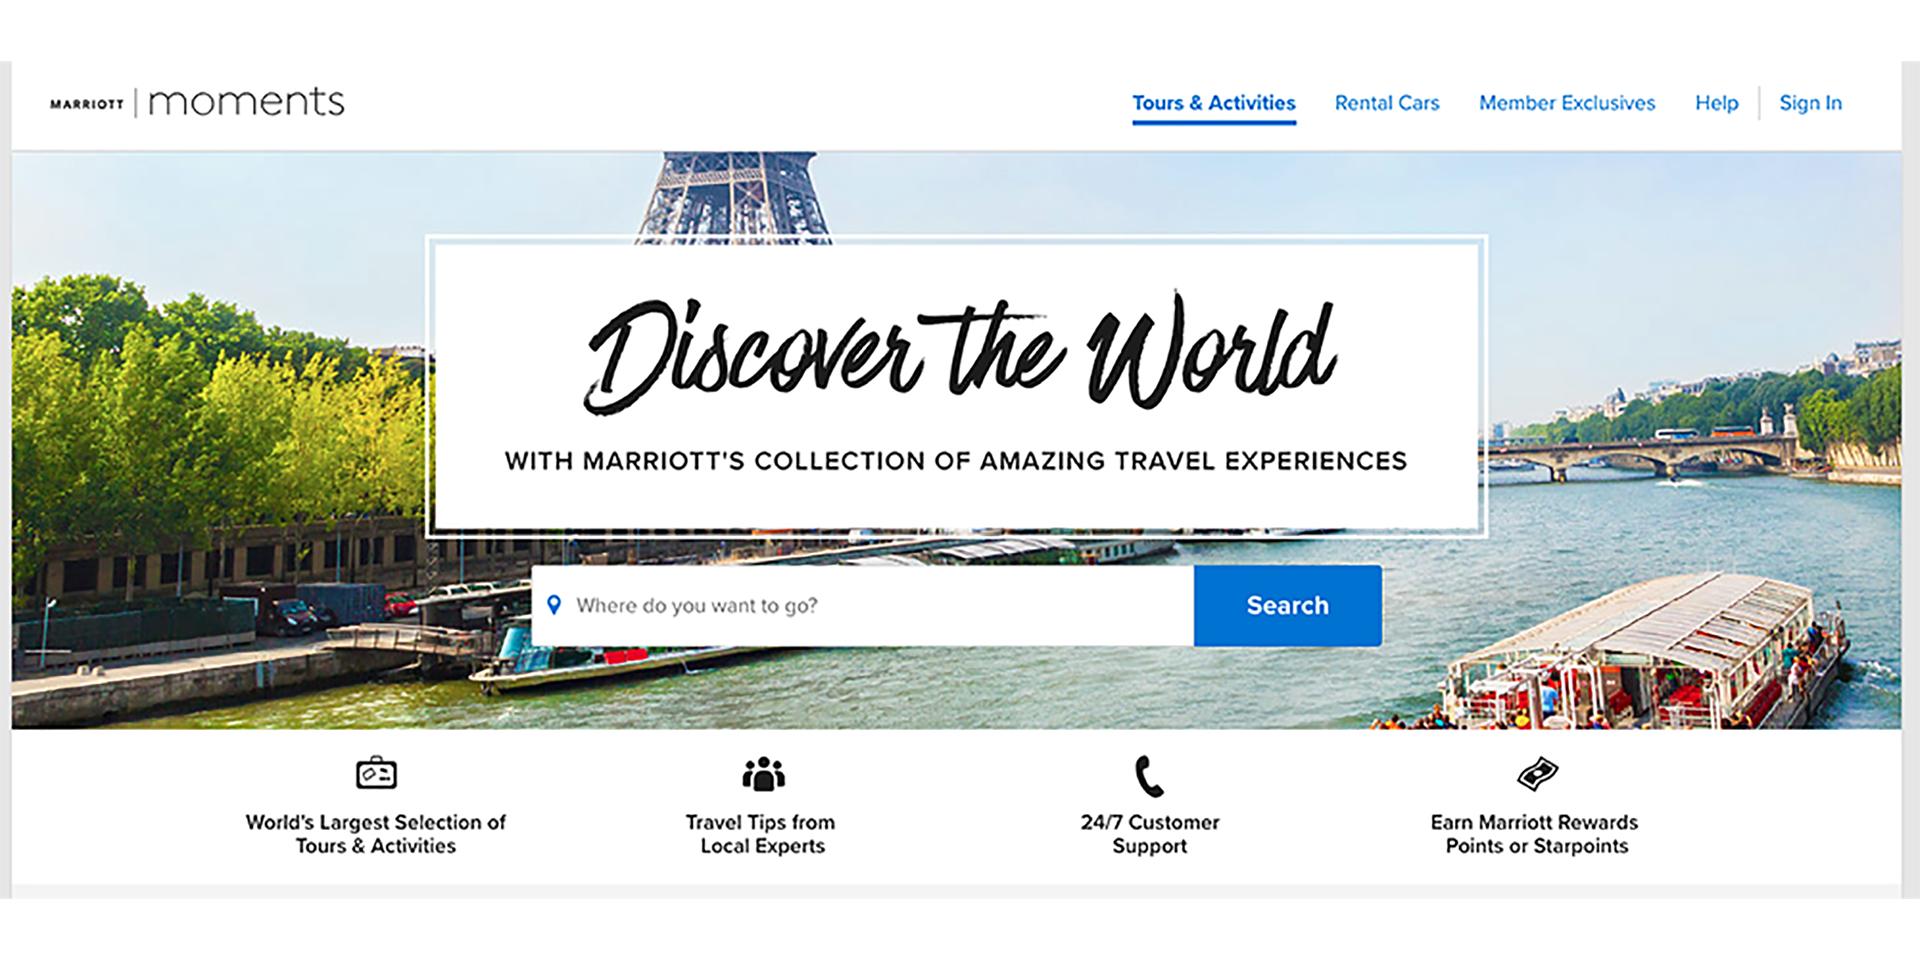 marriott search by points